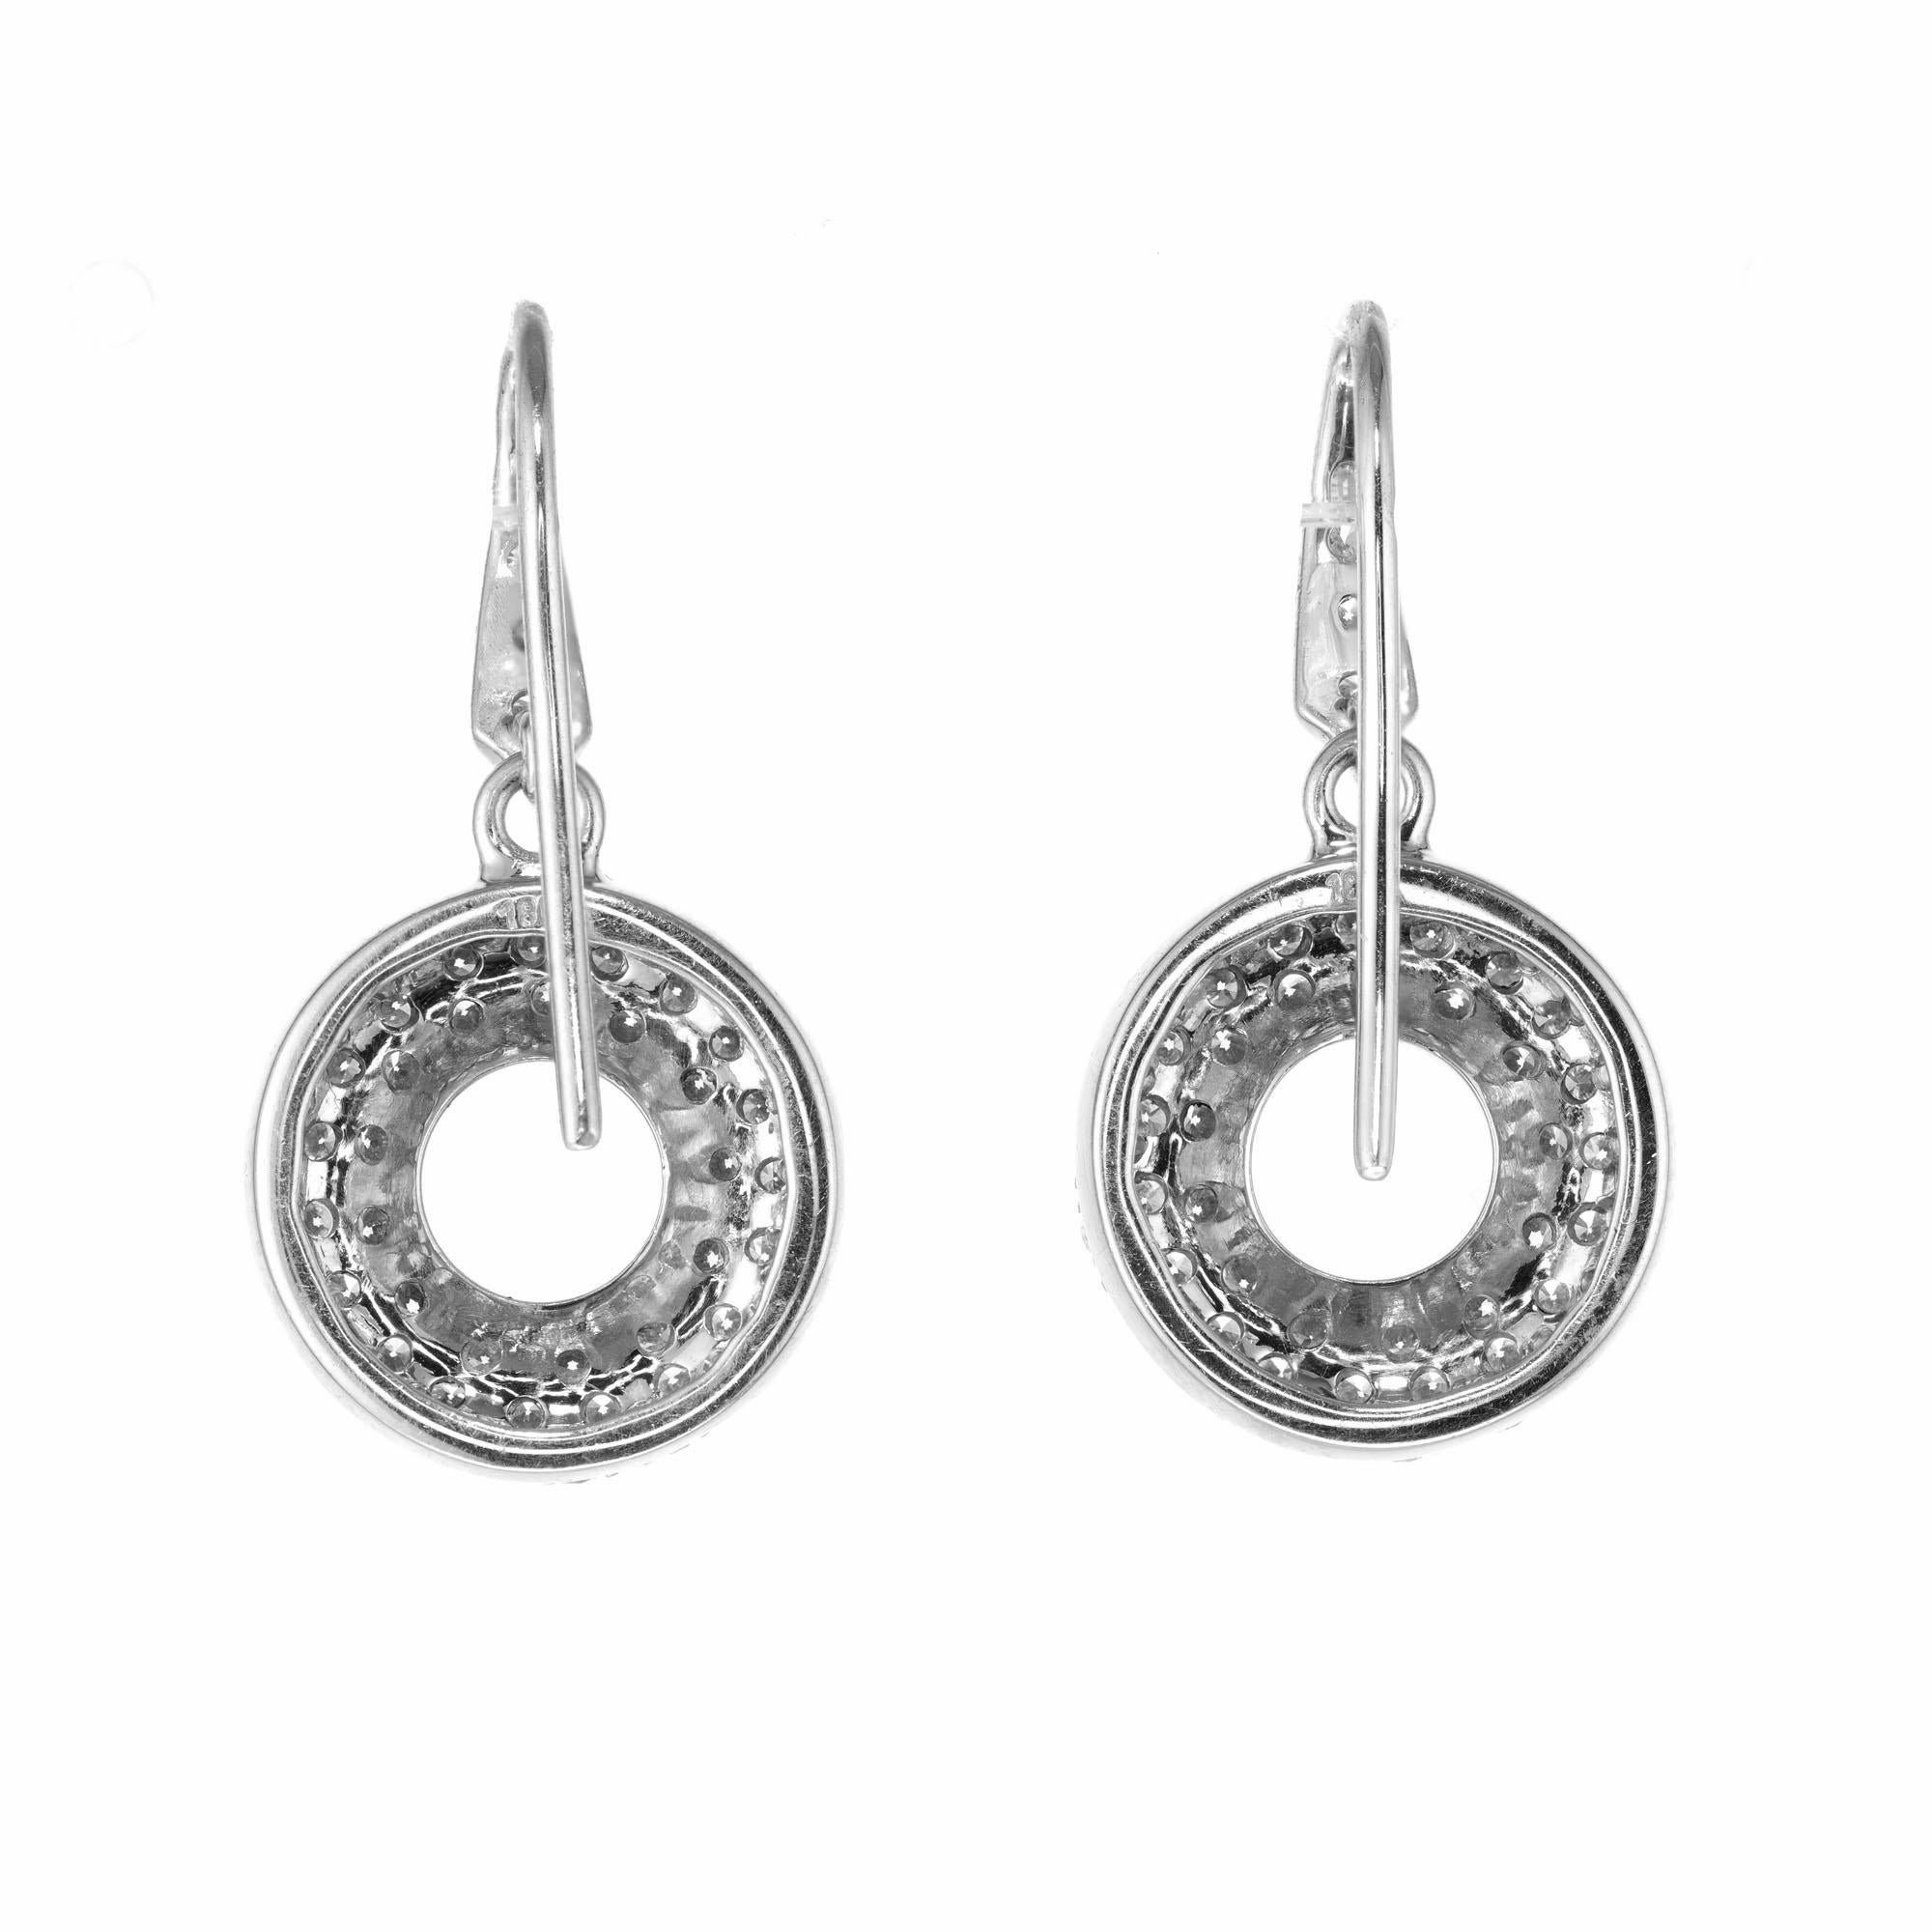 1.45 Carat Pave Diamond White Gold Dangle Earrings In Excellent Condition For Sale In Stamford, CT